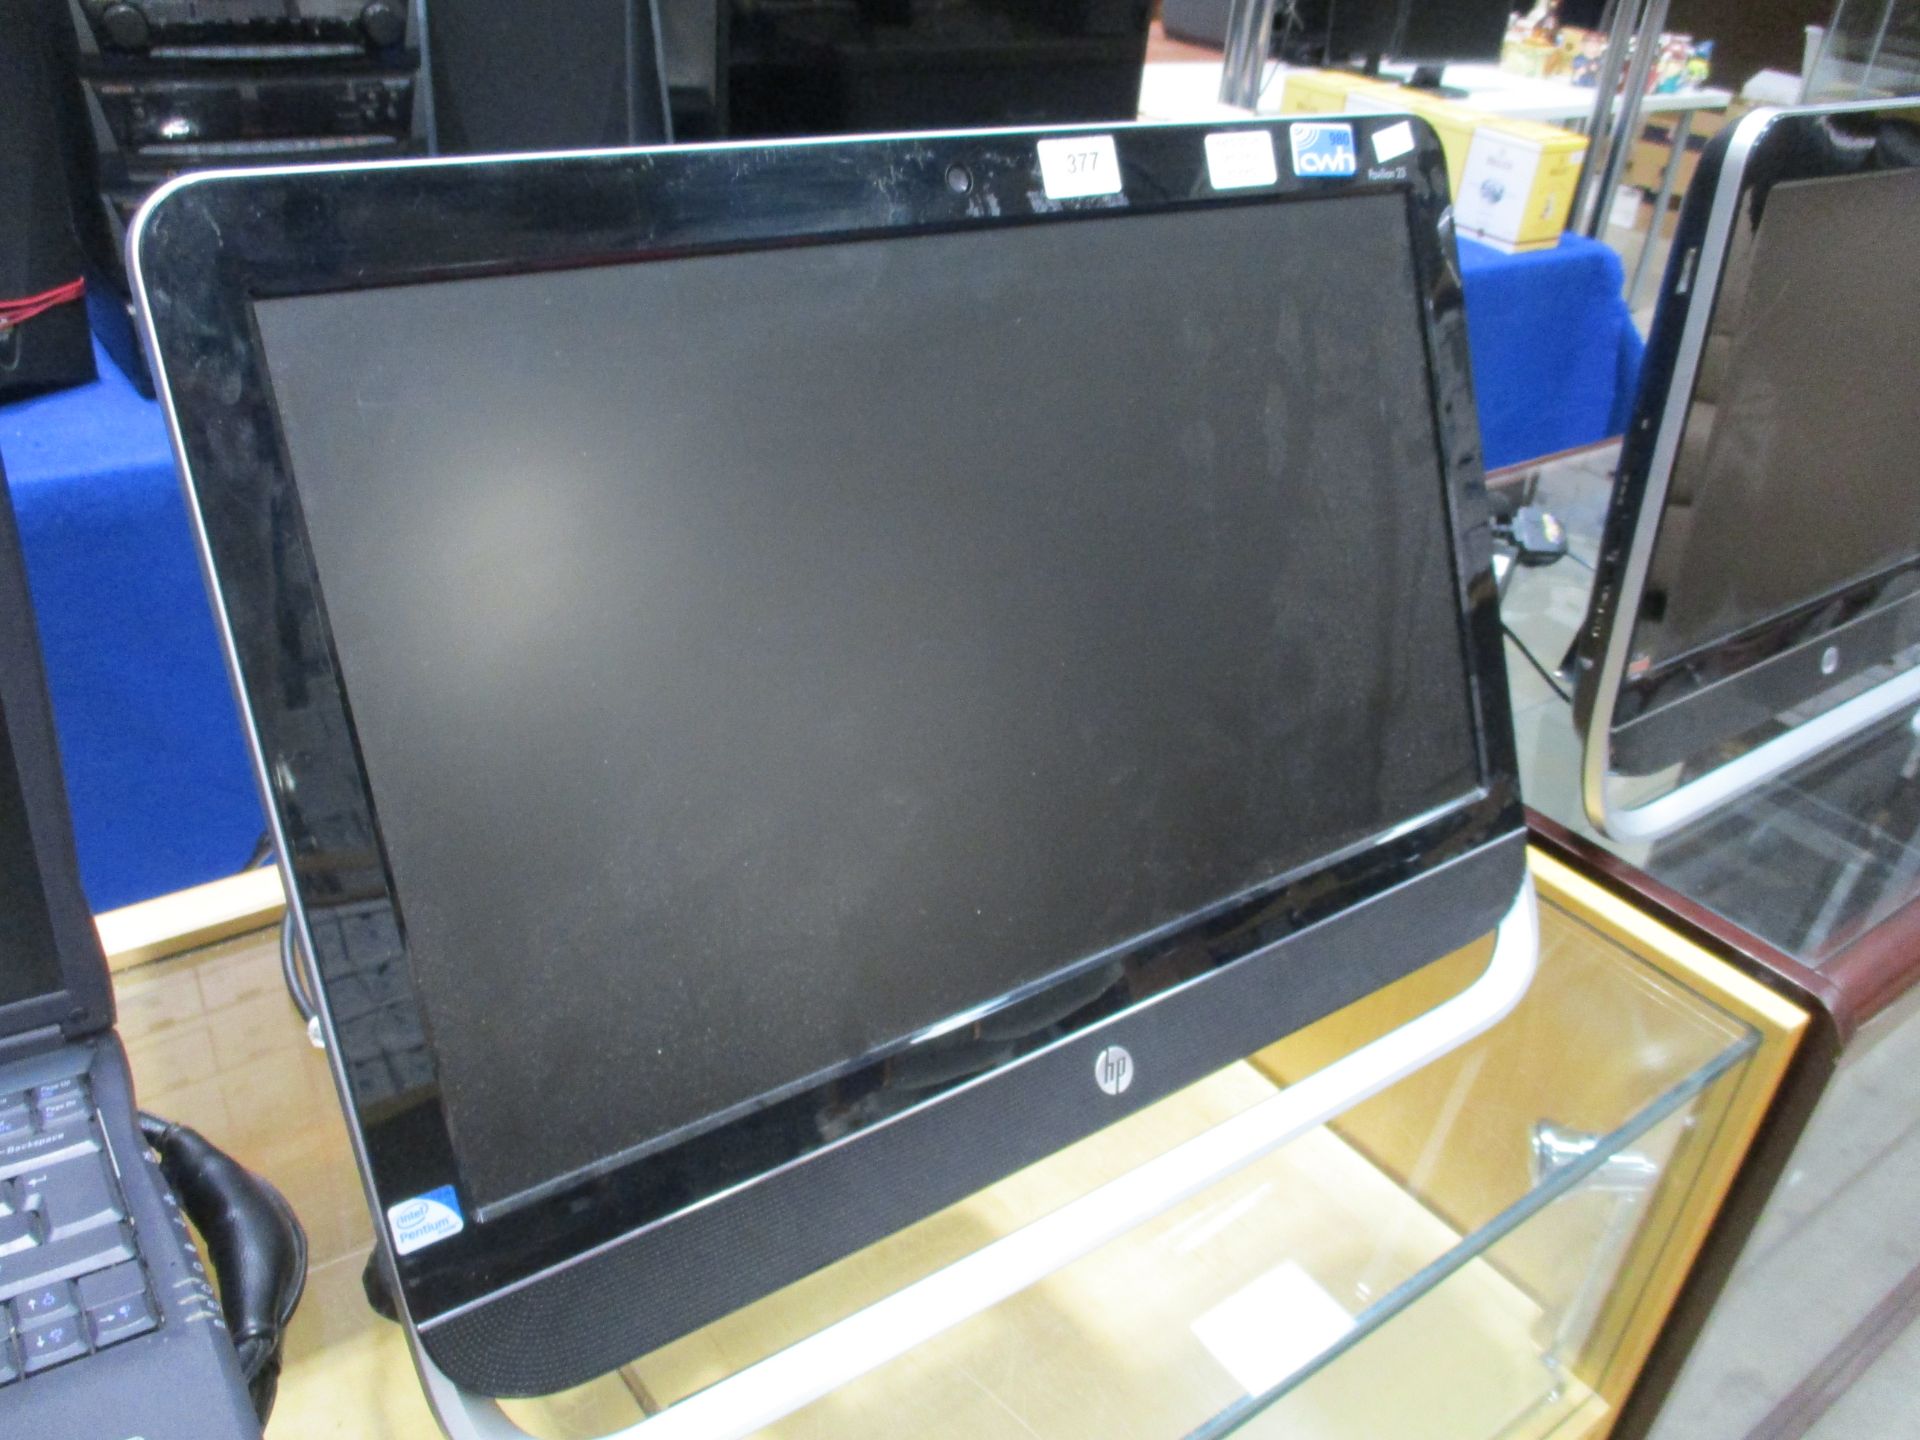 A HP Pavilion 23 all-in-one computer 23" screen Pentium complete with power adaptor